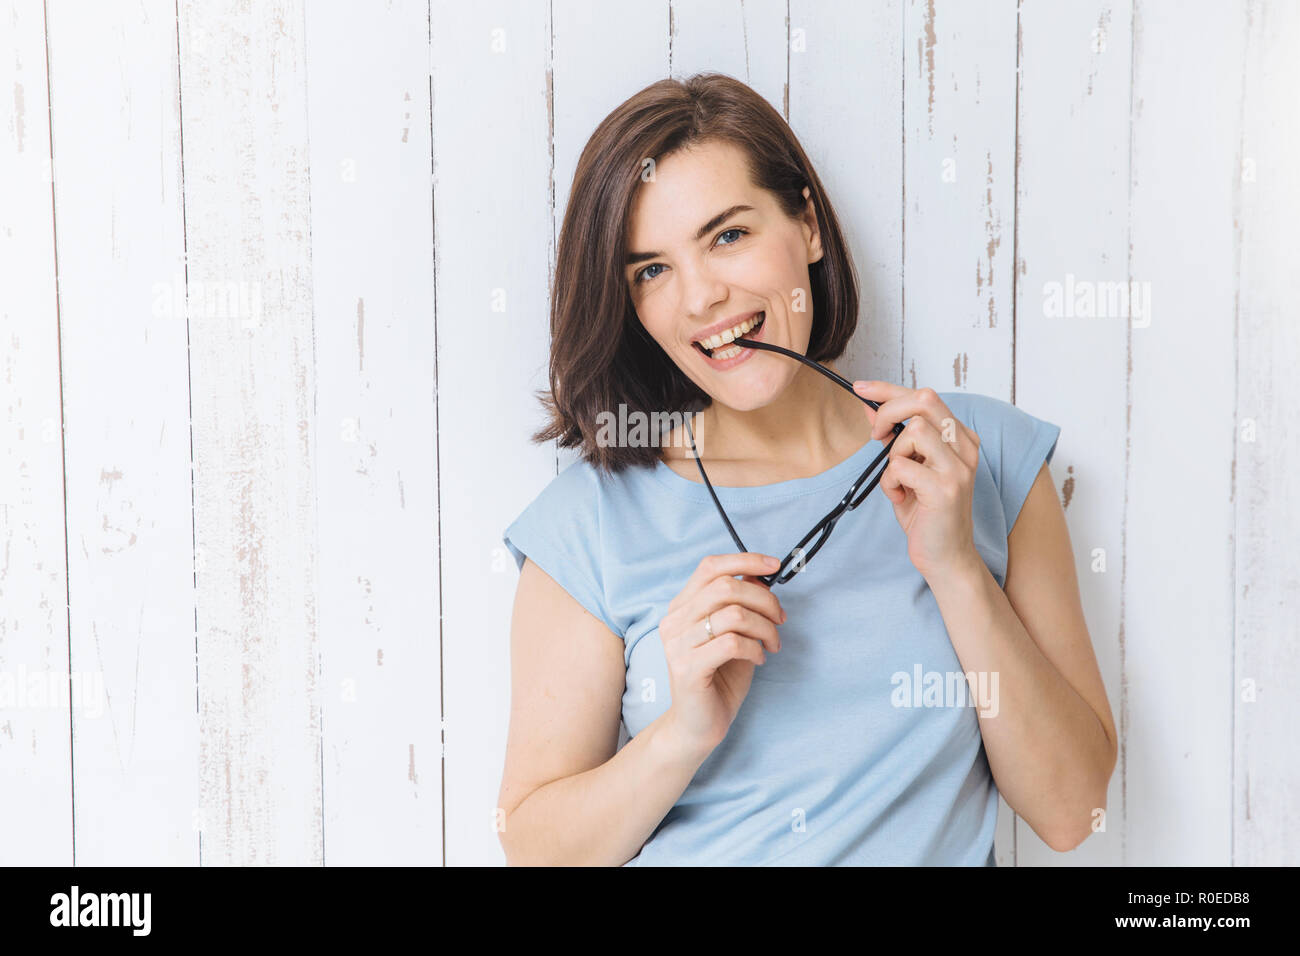 Waist up portrait of blue eyed brunette female takes off spectacles, dressed casually, stands against white fence background, being in good mood. Chee Stock Photo